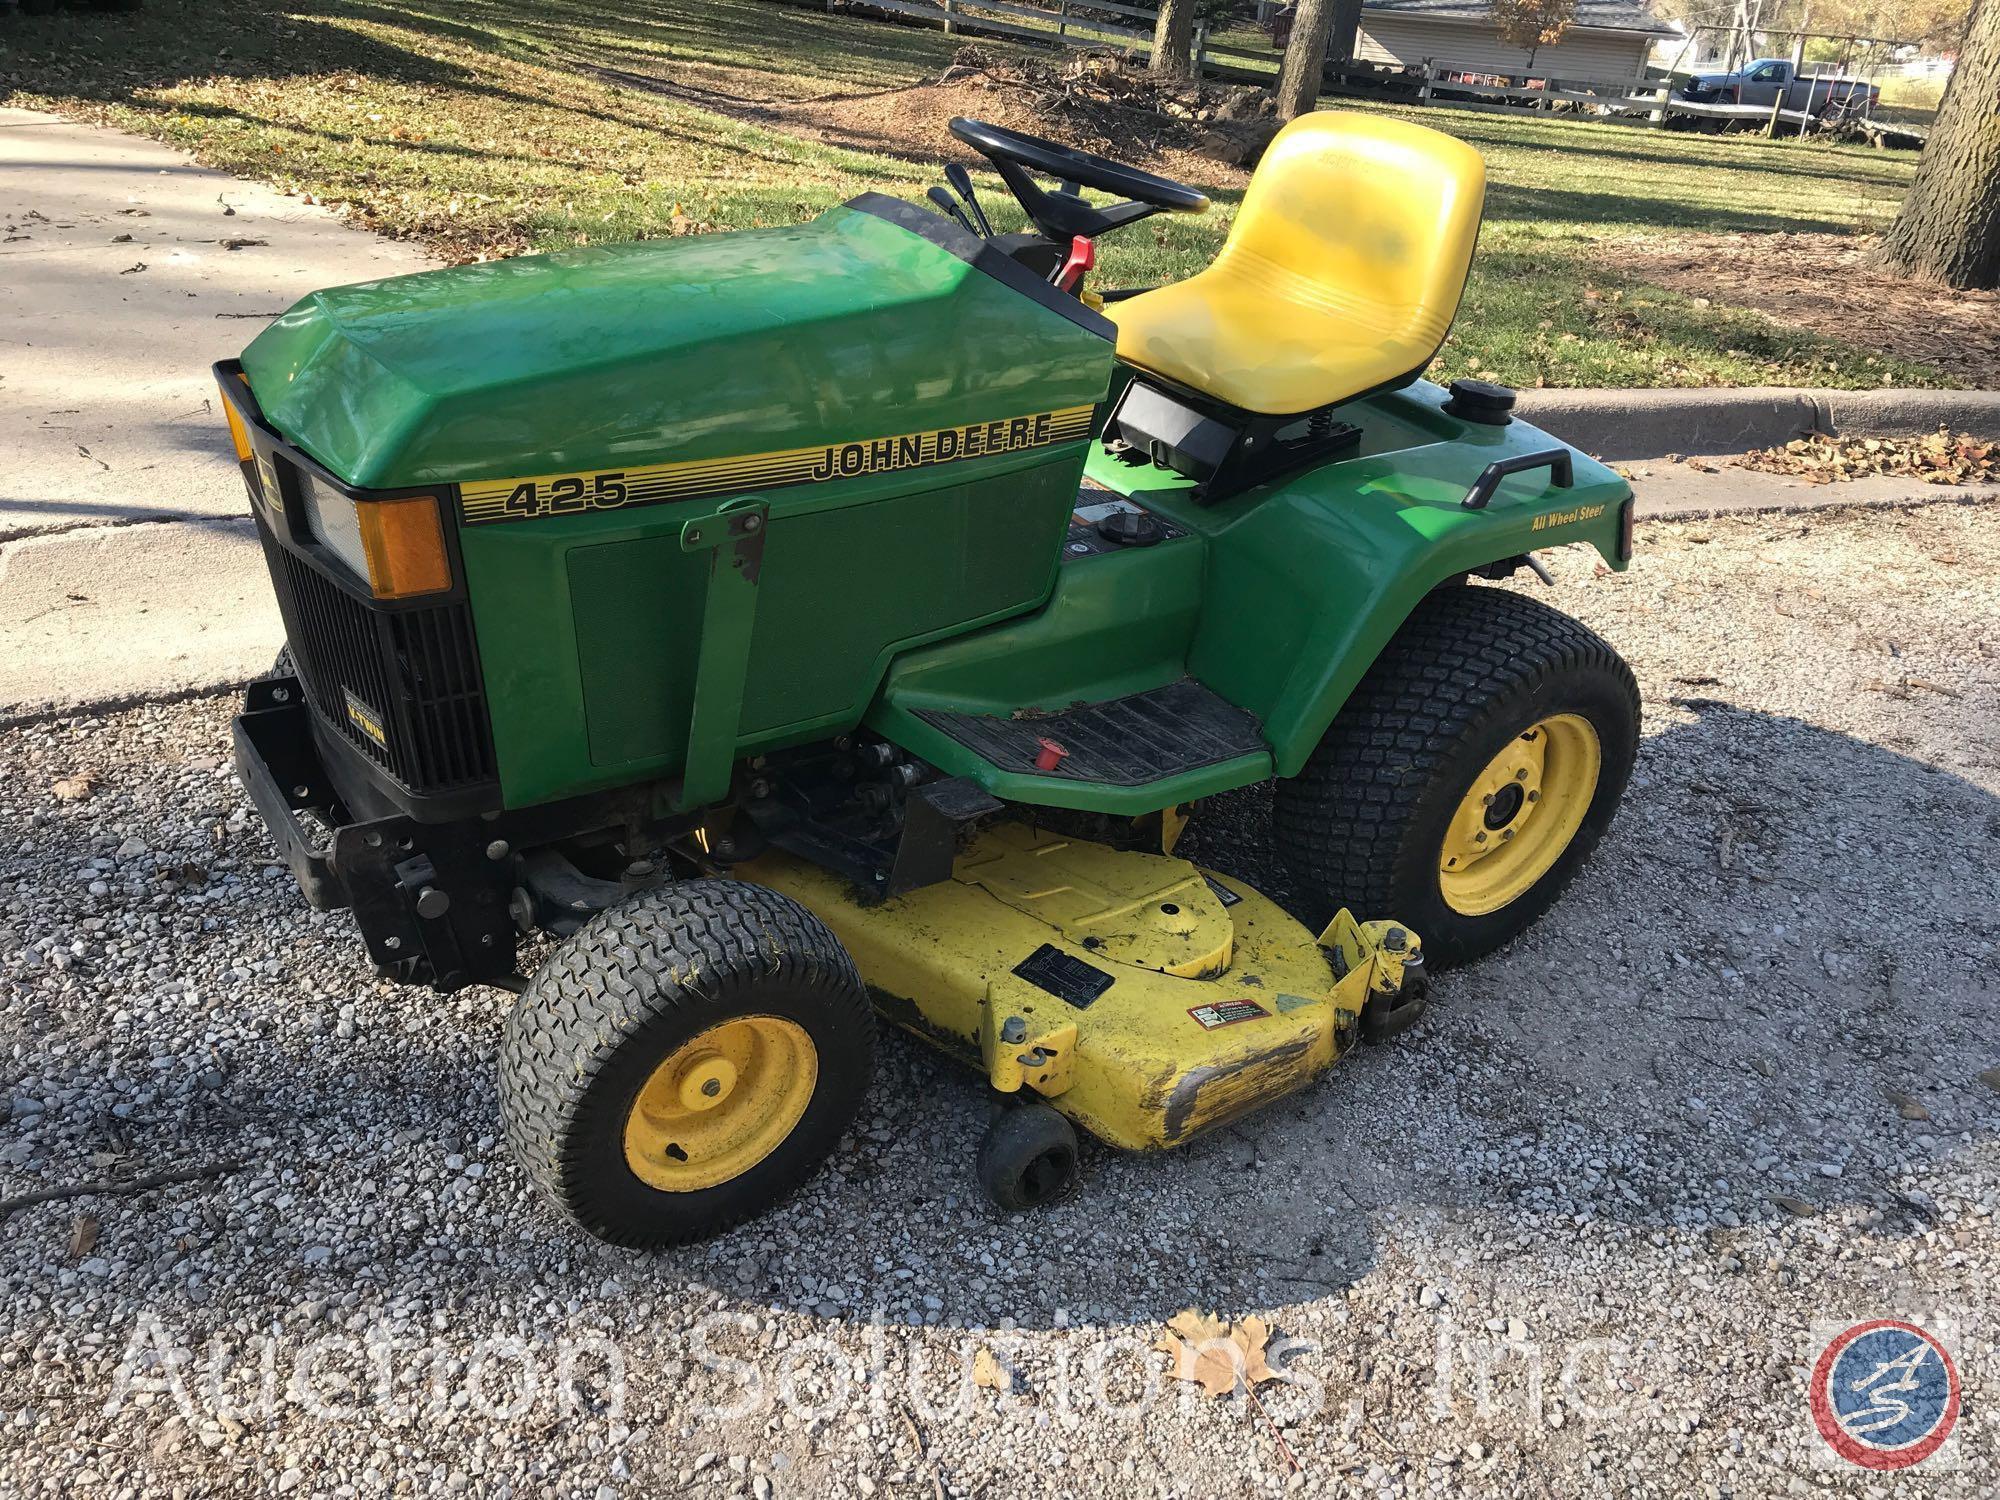 John Deere 425 54-*HD Lawn Tractor w/ Cab [Not Pictured] 1495 Hours **Does NOT include Powerflow